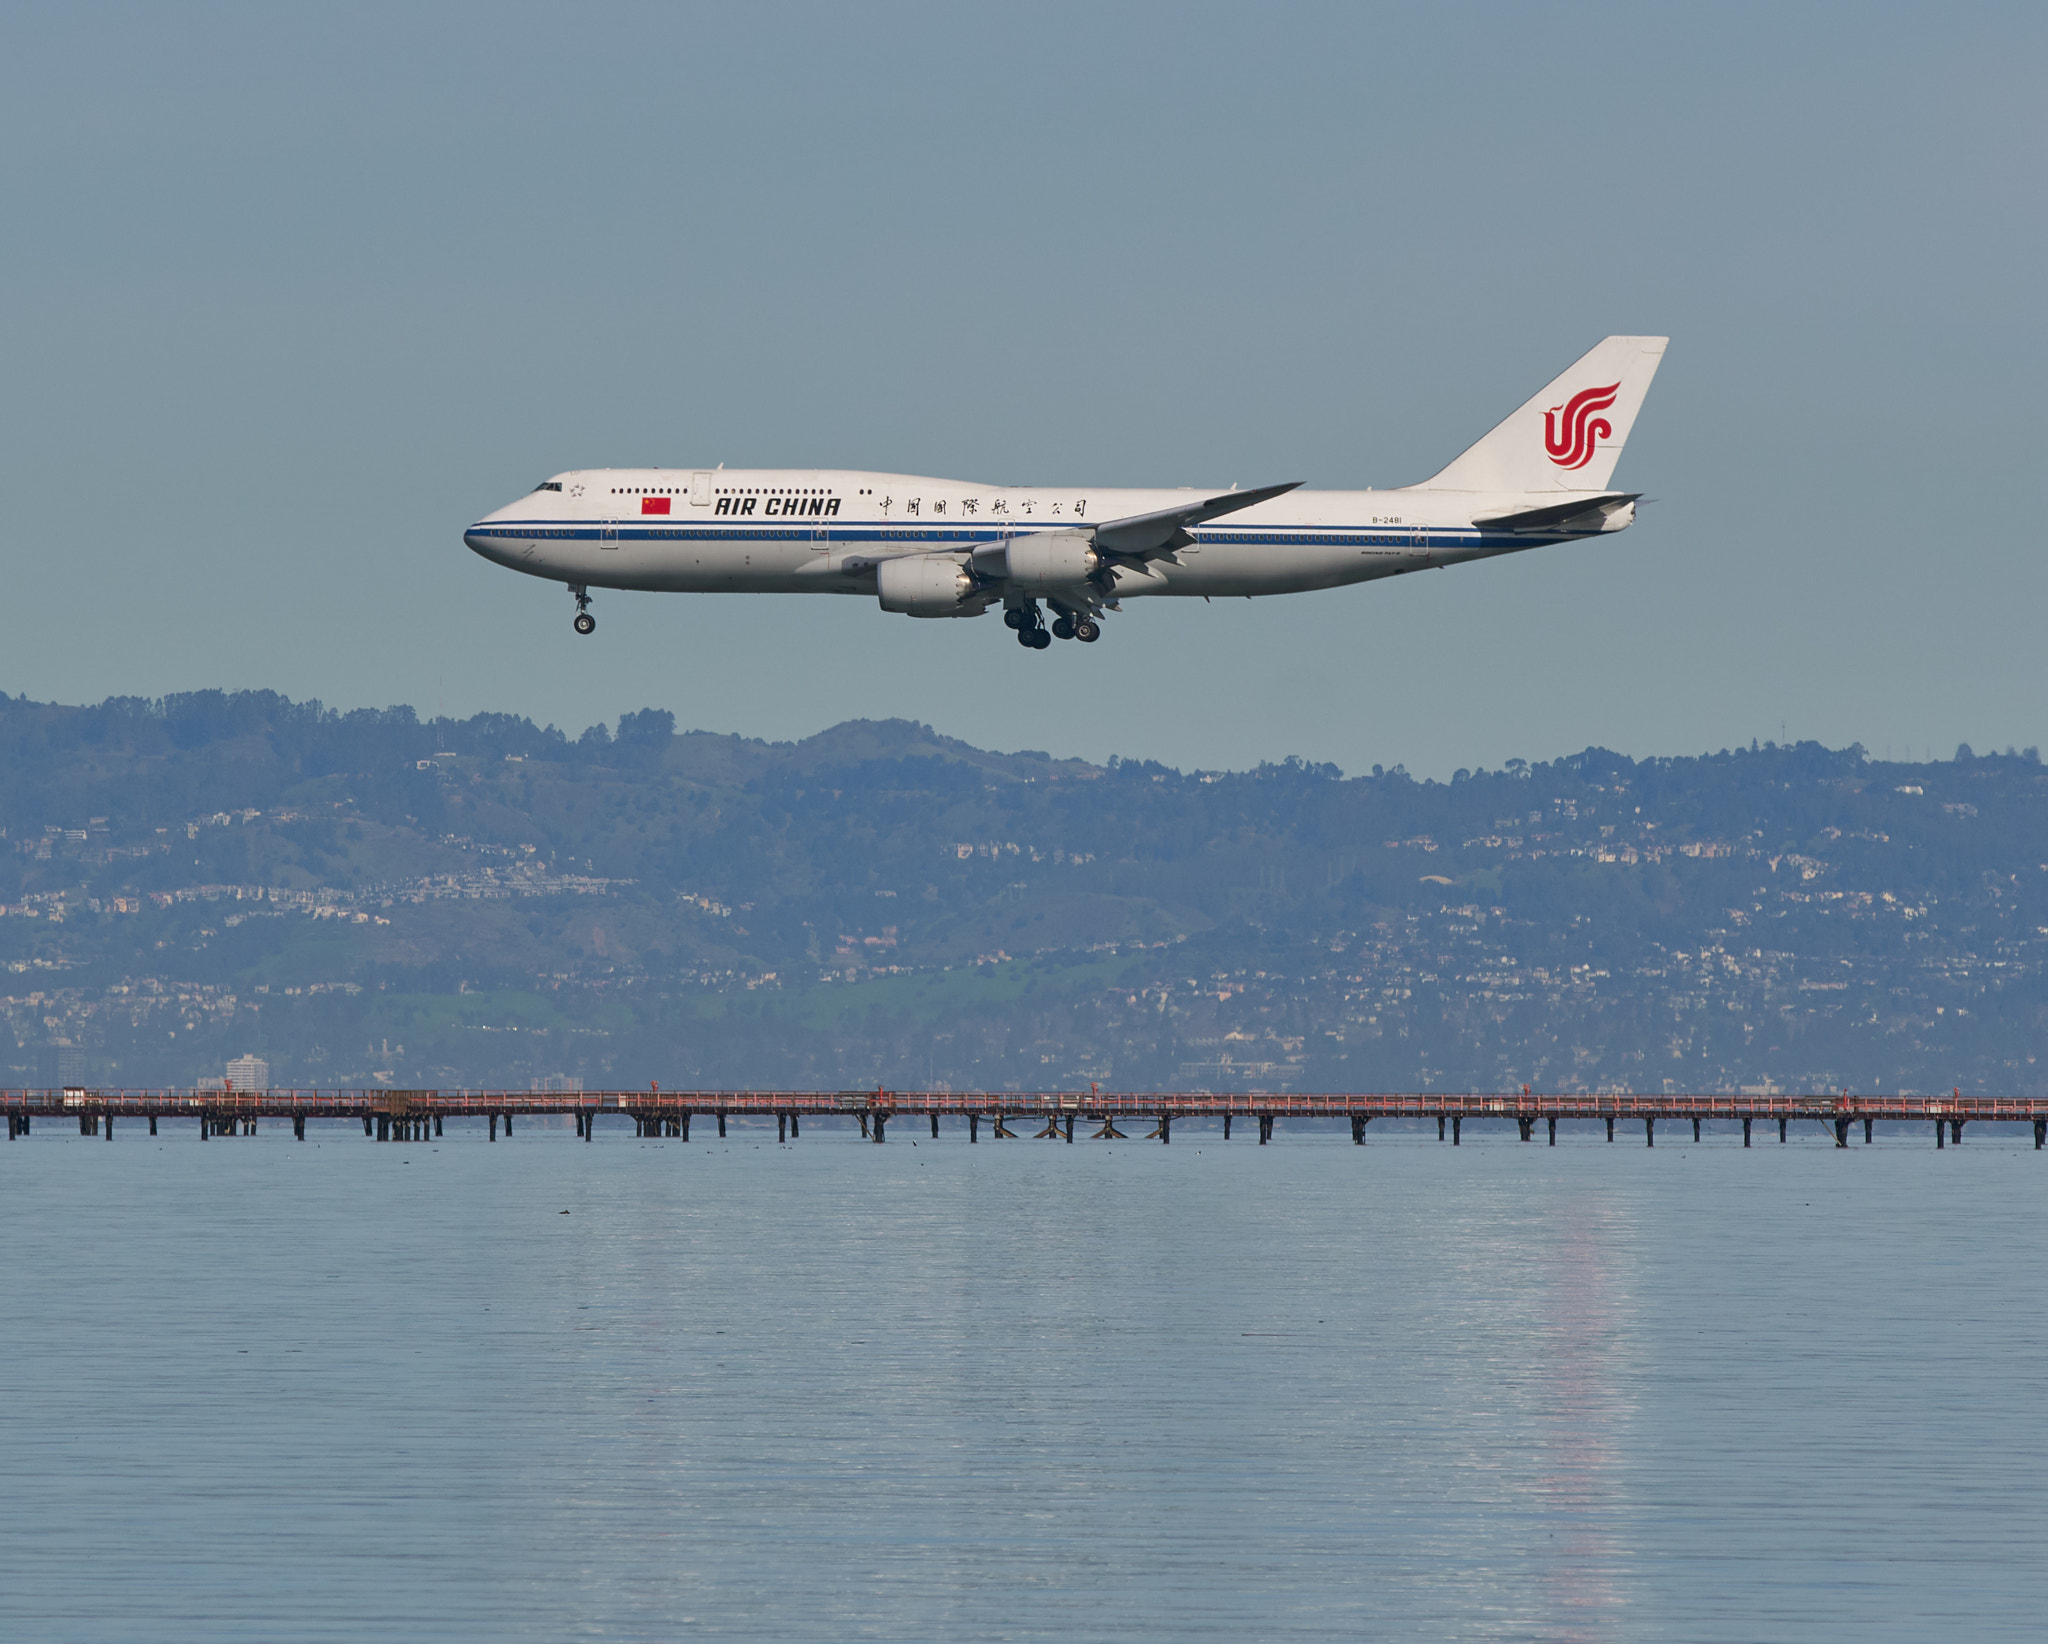 Sony a6500 + Sigma 70-200mm F2.8 EX DG HSM APO Macro sample photo. Air china and its big wings! photography